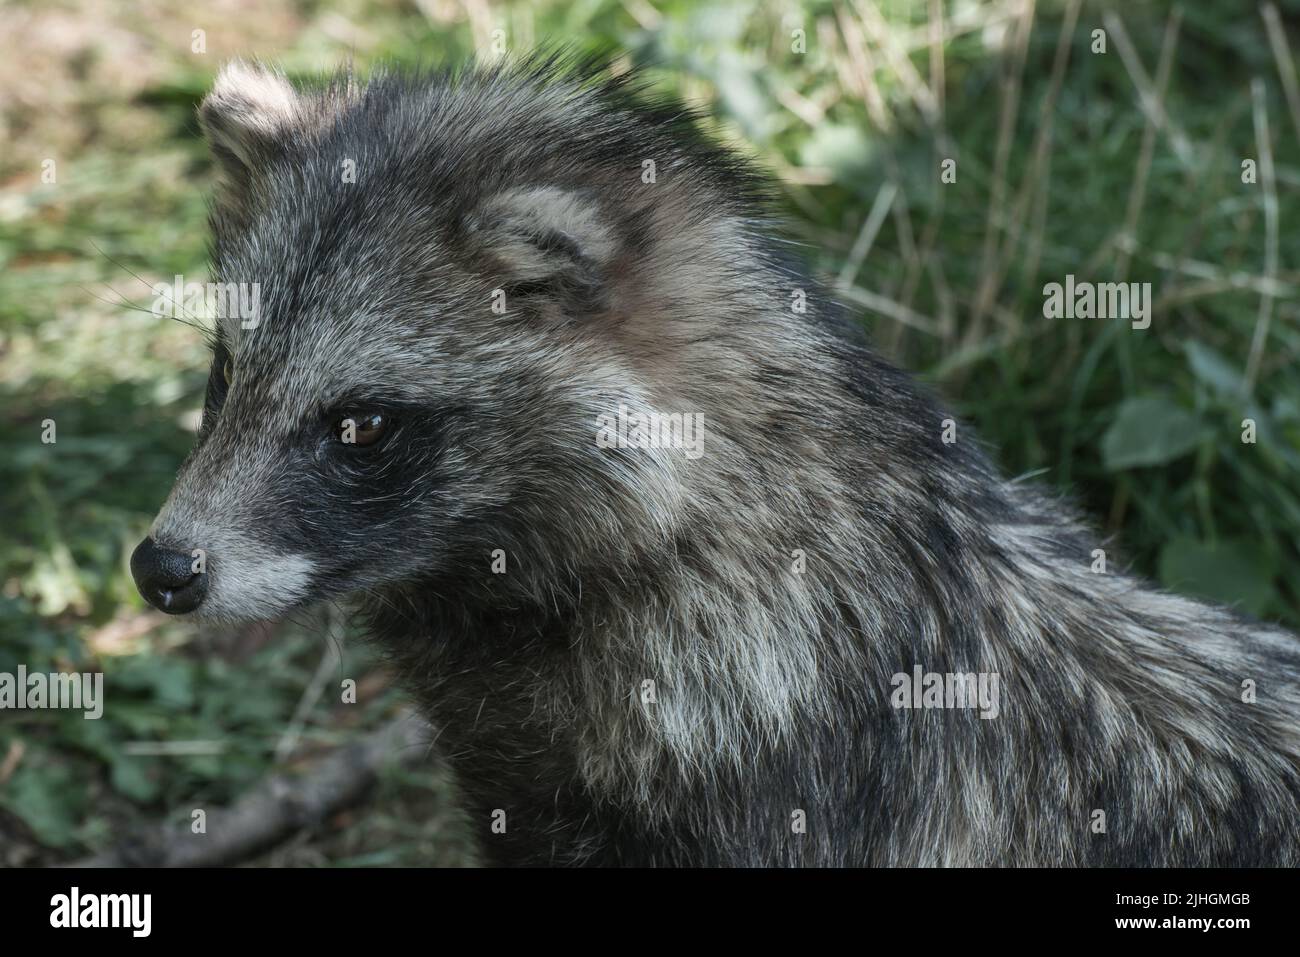 An East Asian Tanuki or Racoon Dog (nyctereutes procyonoides) photographed in captivity Stock Photo